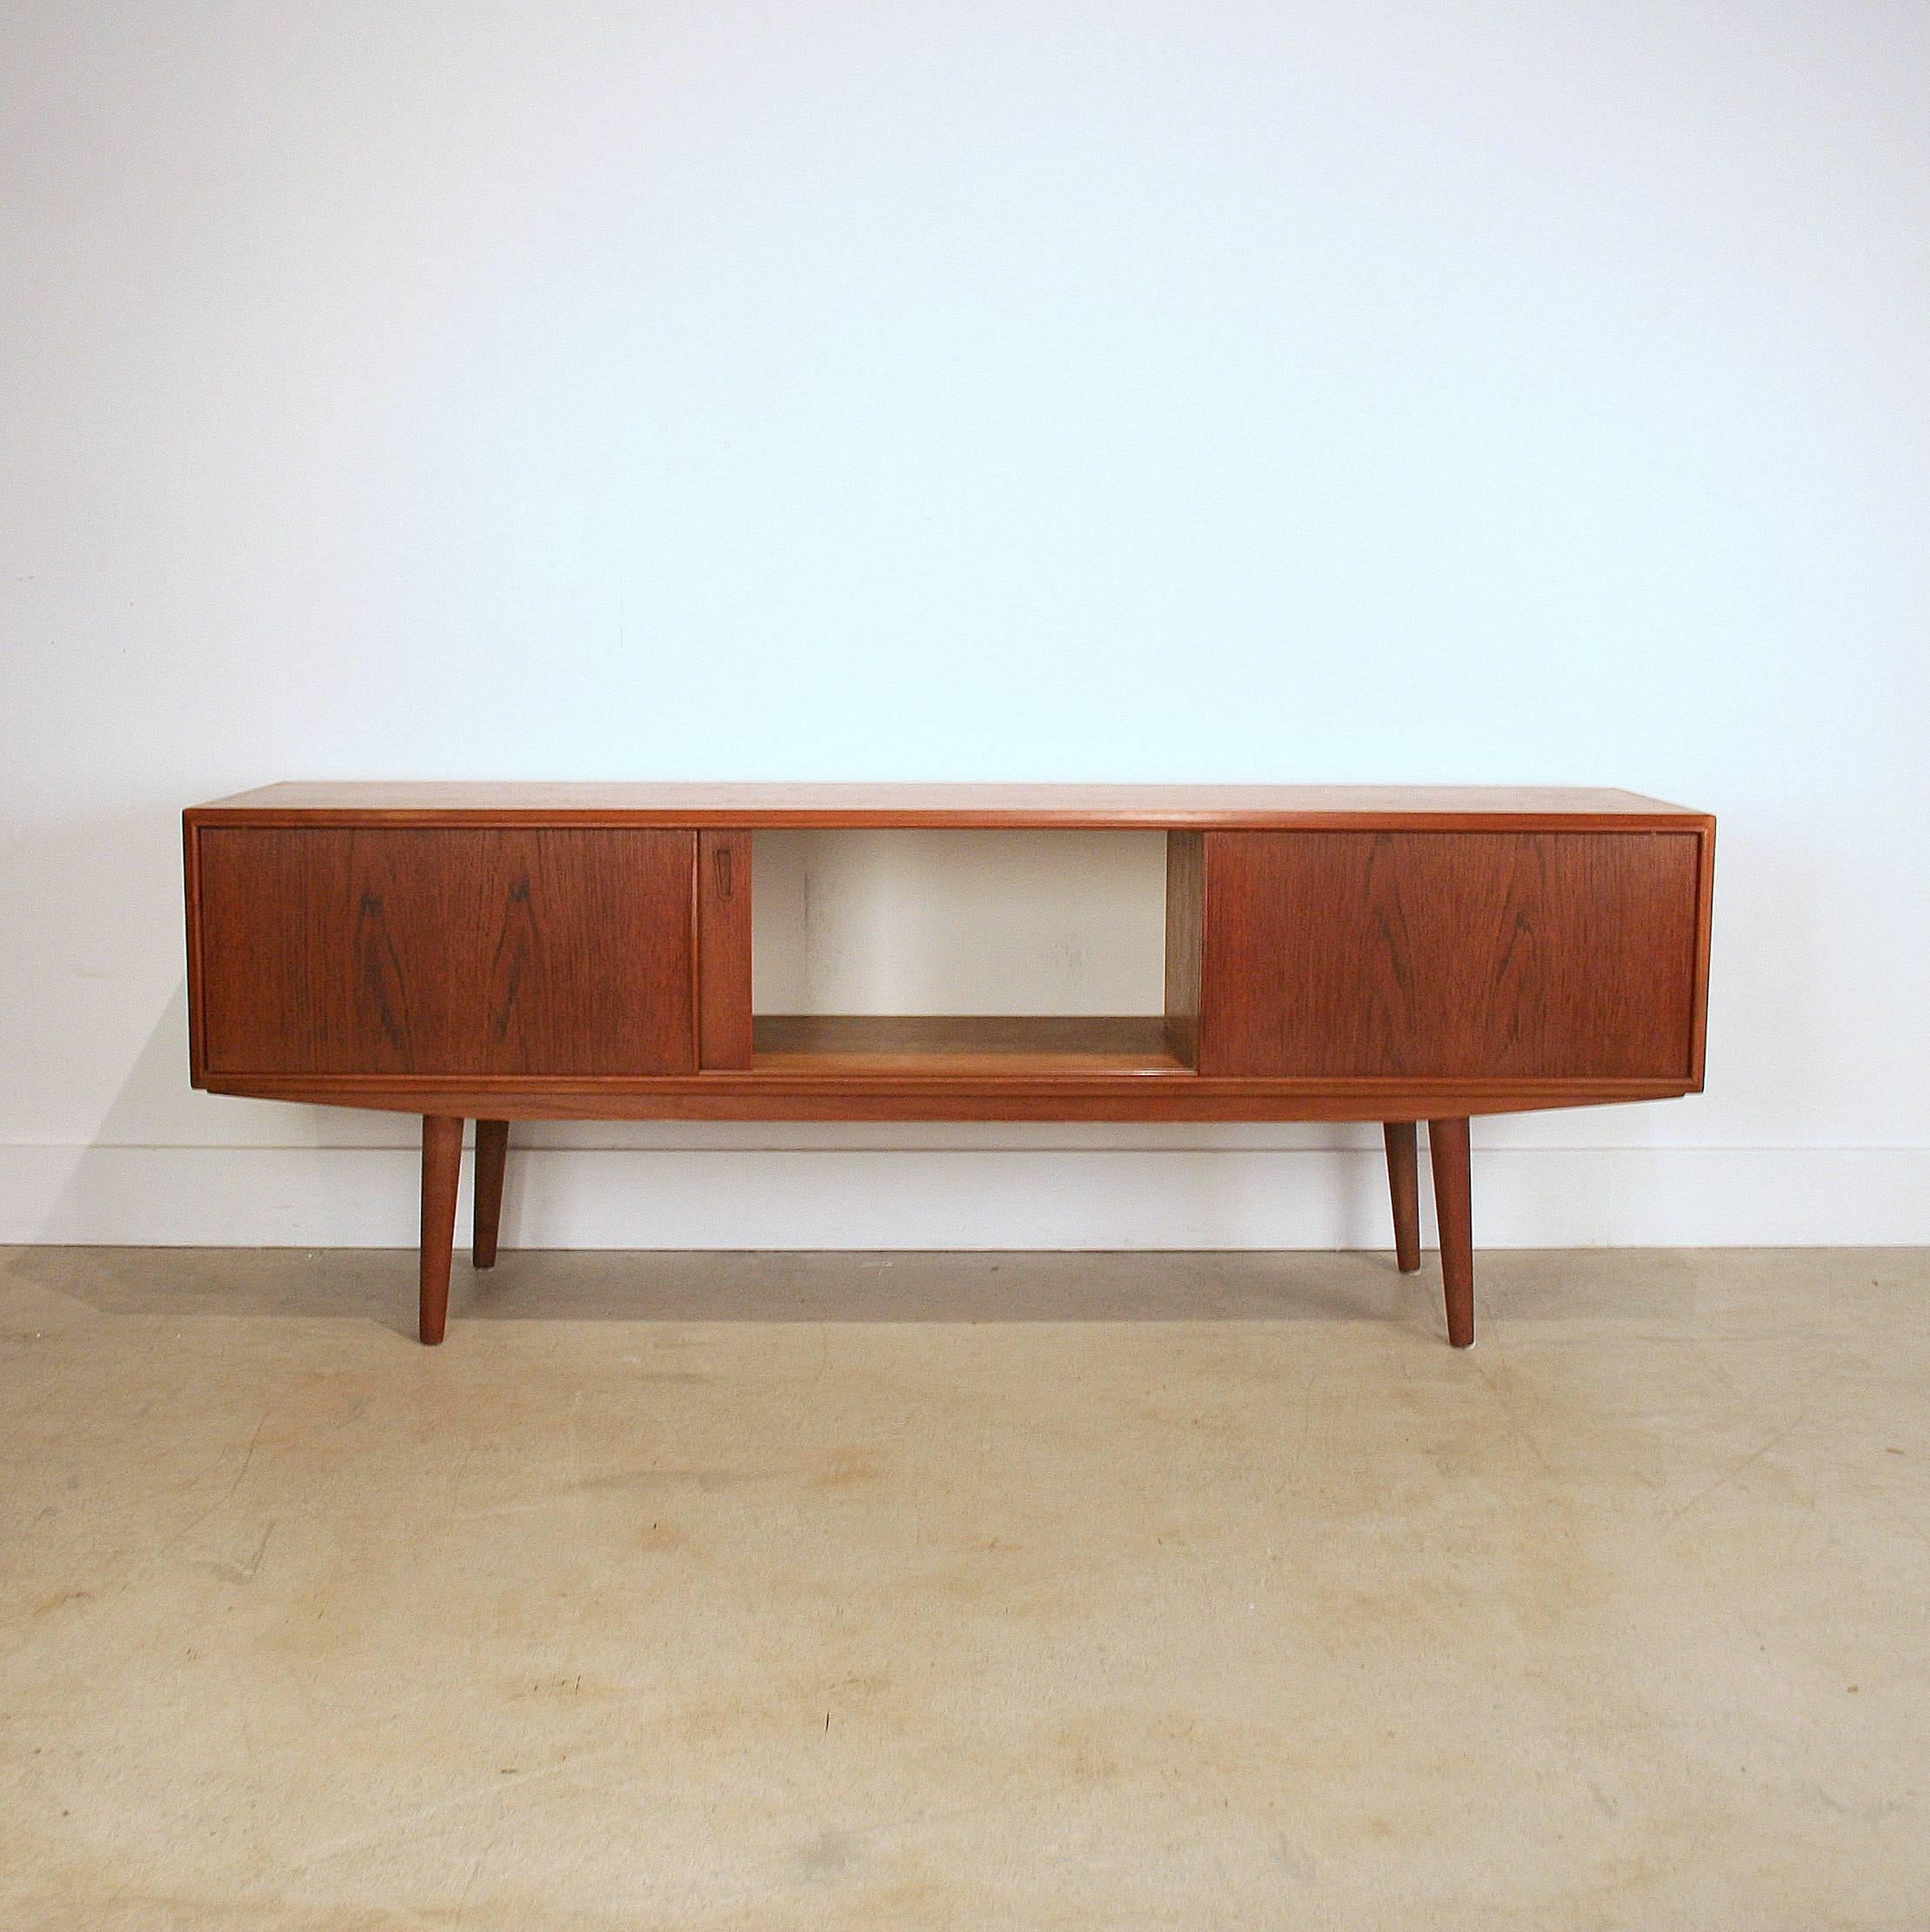 Vintage Danish Teak Sideboard In Excellent Condition For Sale In Vancouver, BC